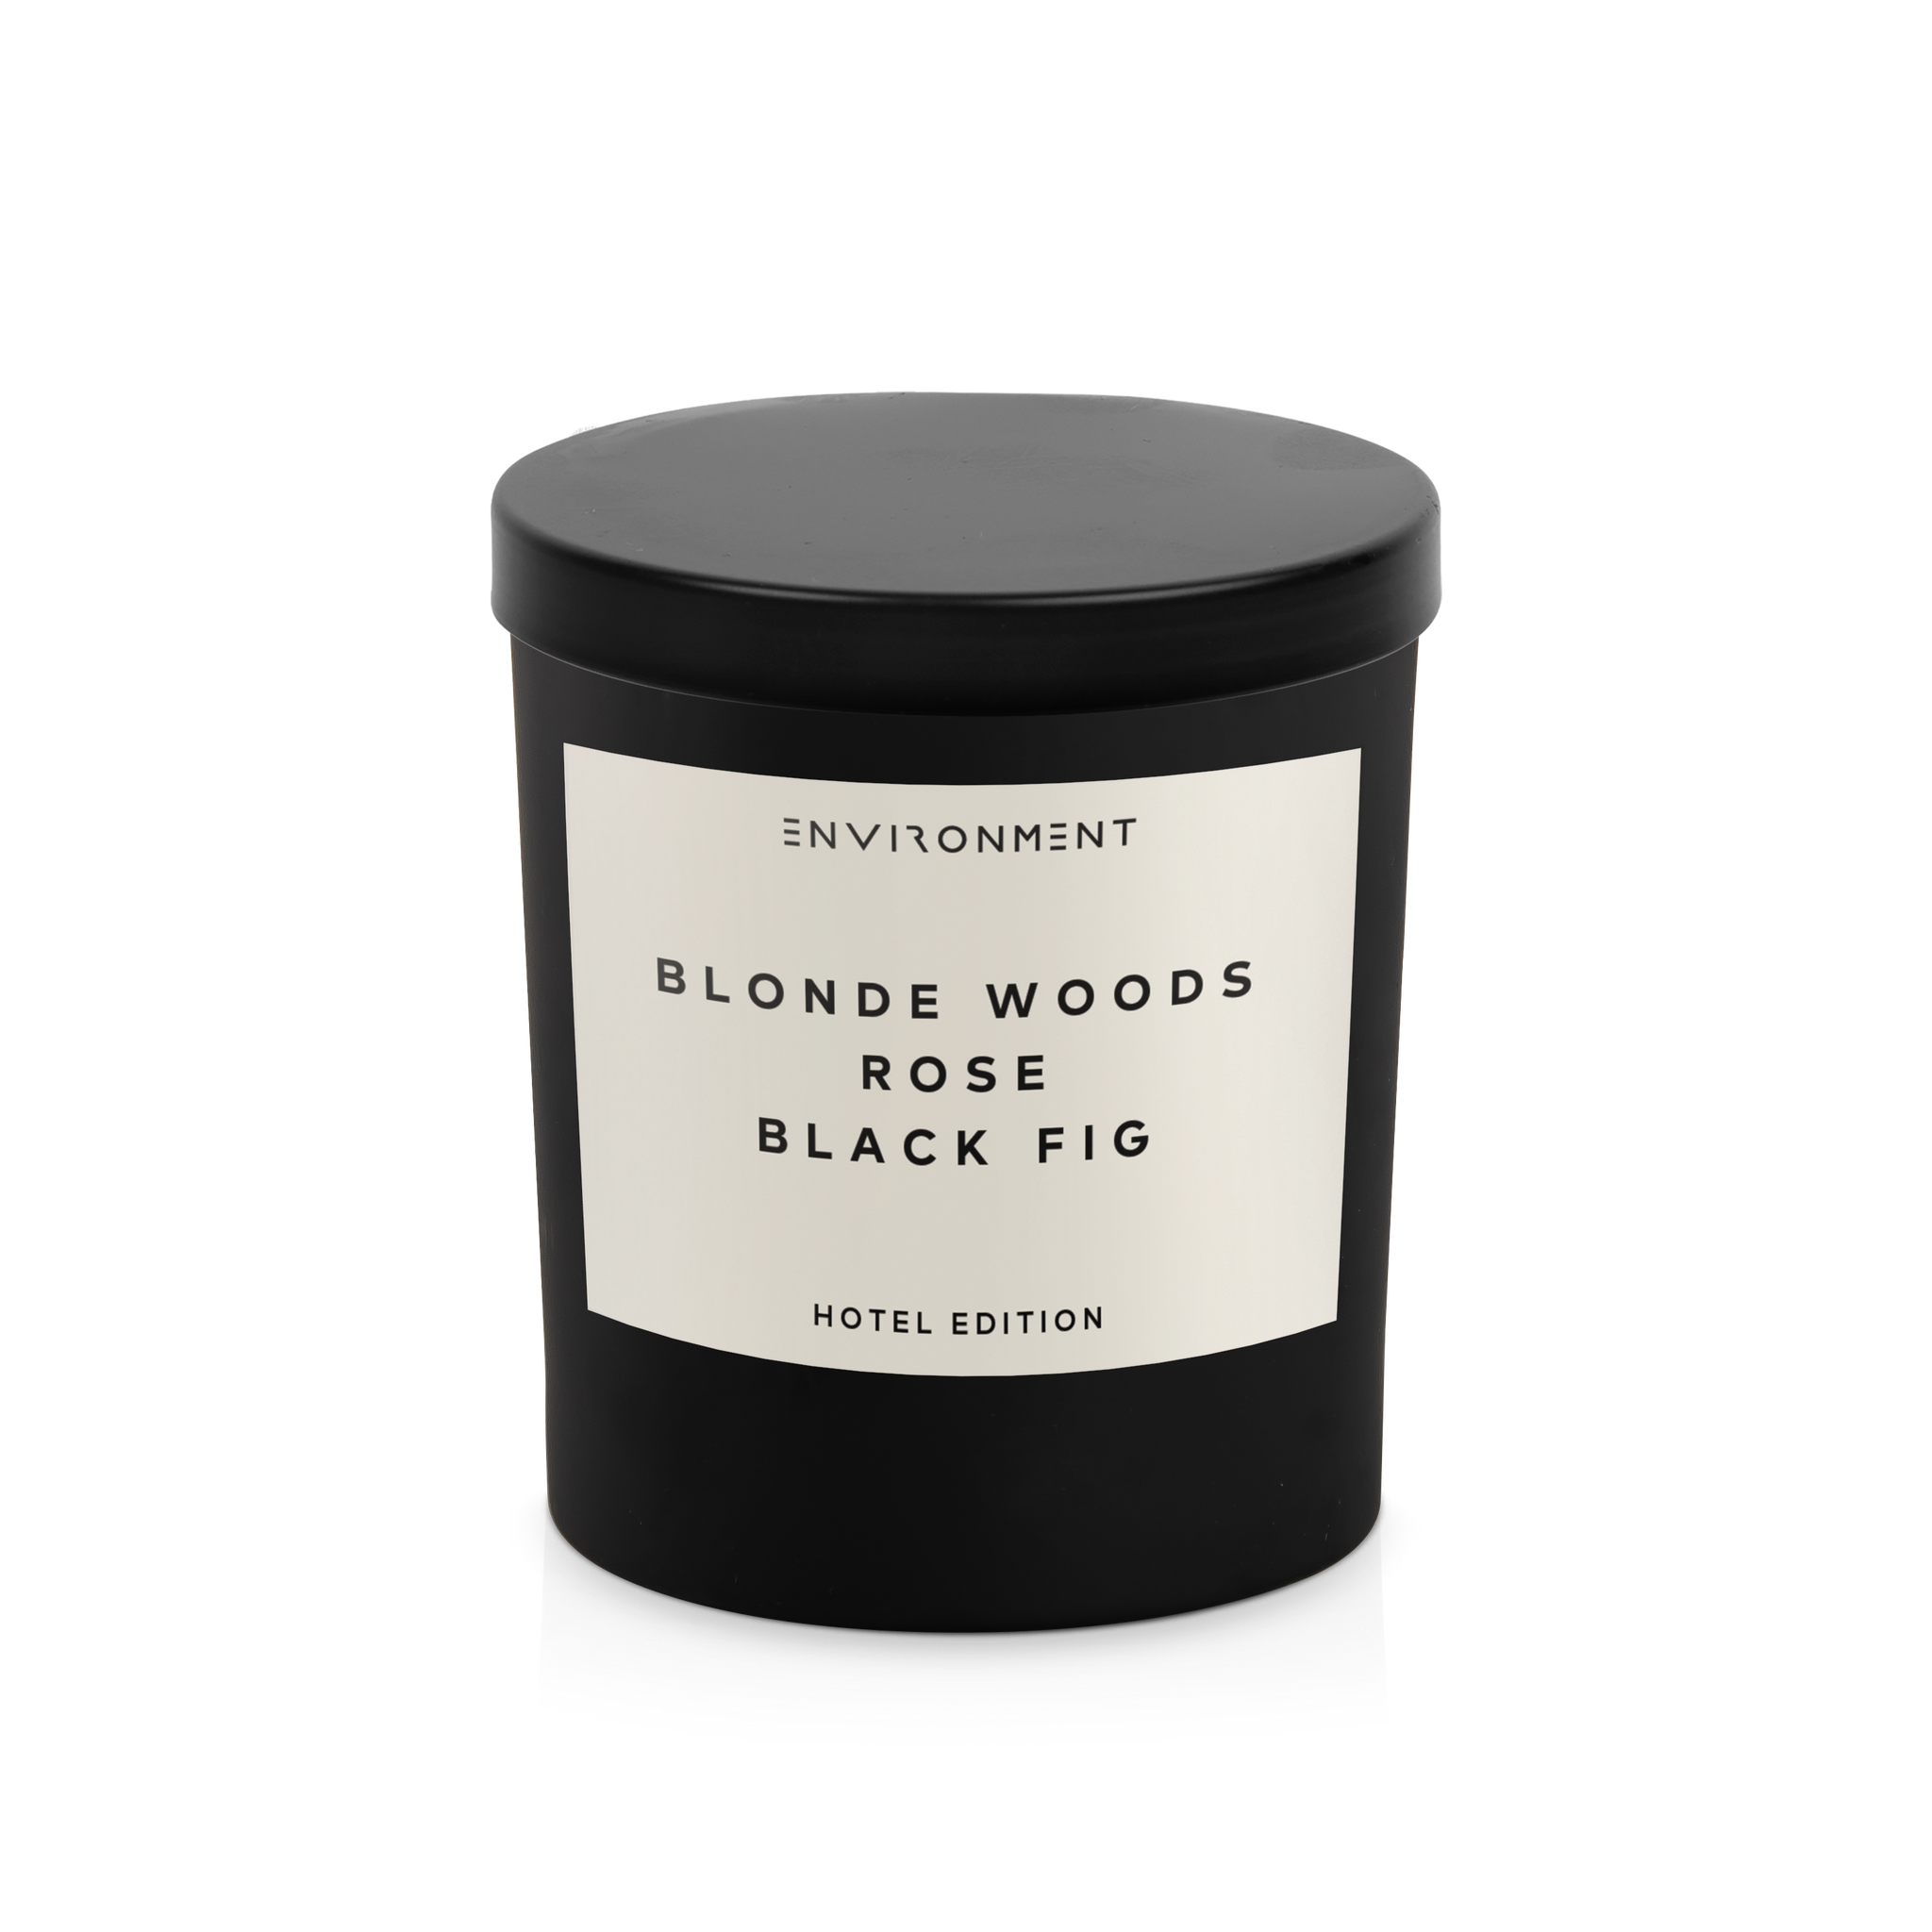 Blonde Woods | Rose | Black Fig 200ml Diffuser and 8oz Candle Gift Pack (Inspired by The EDITION Hotel®)